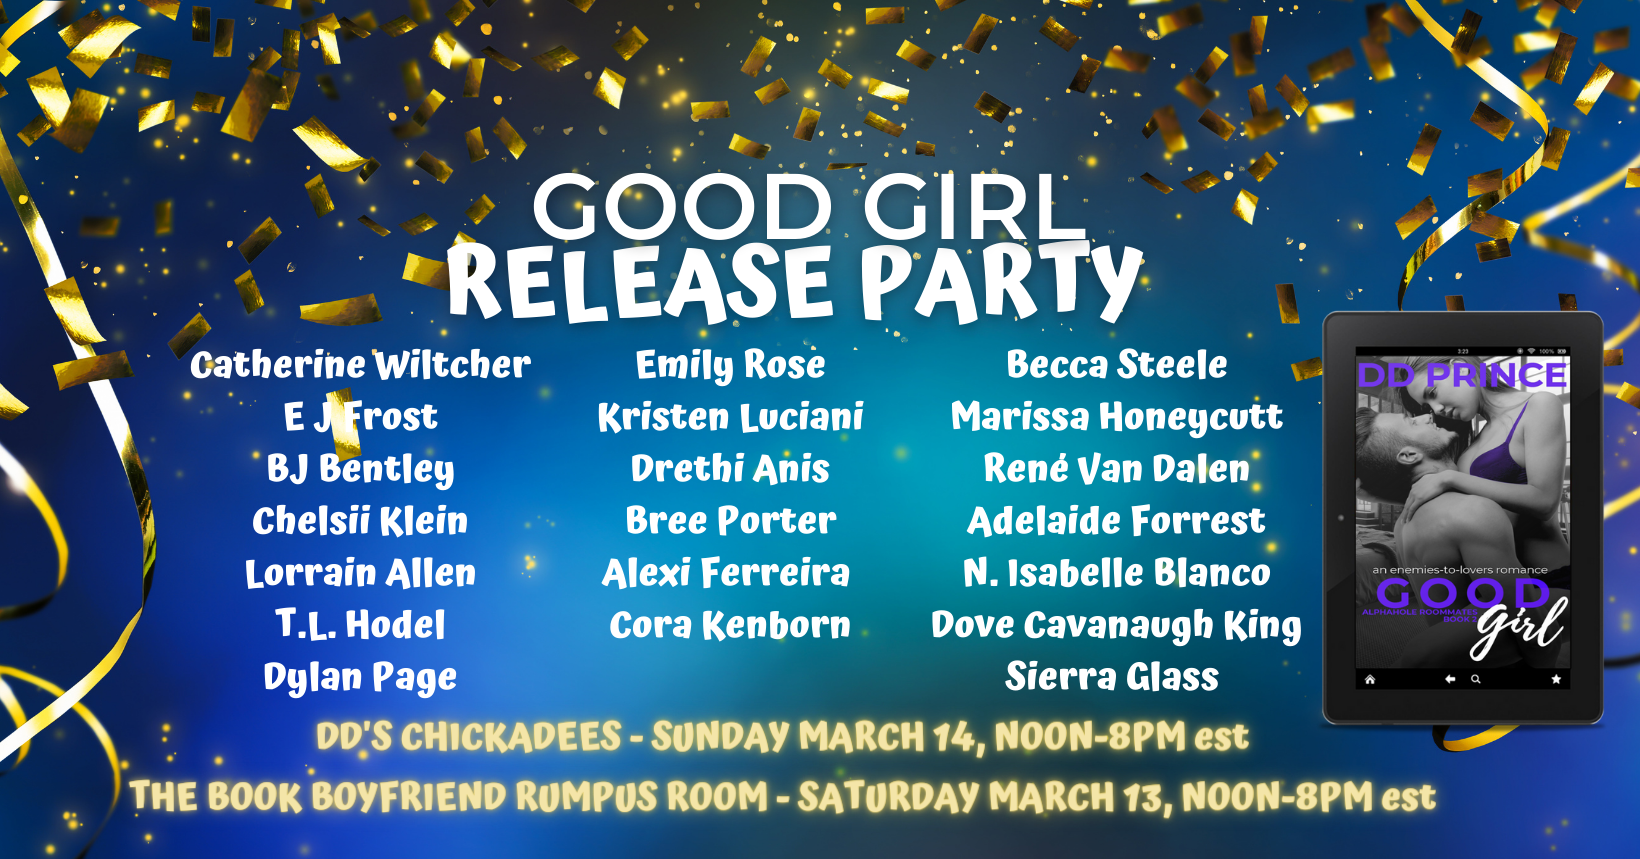 Good Girl enemies to lovers book release party 